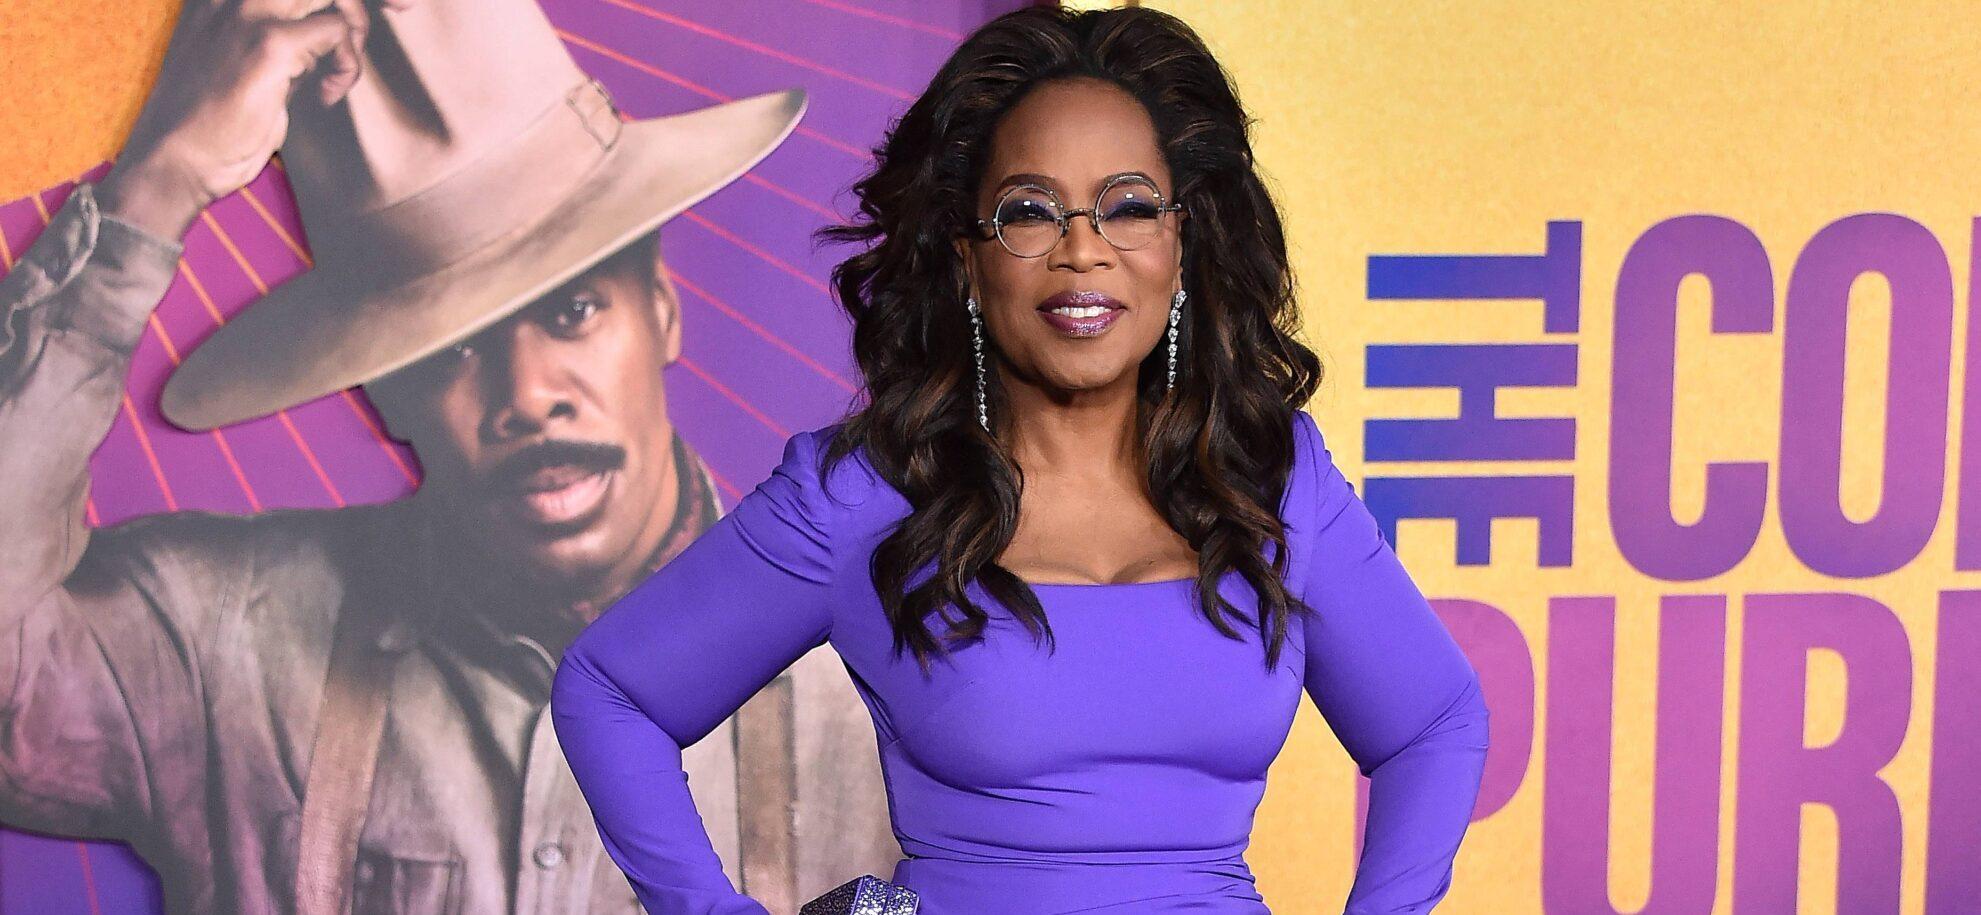 Oprah Winfrey Expresses Regret For Being A ‘Major Contributor’ To Diet Culture